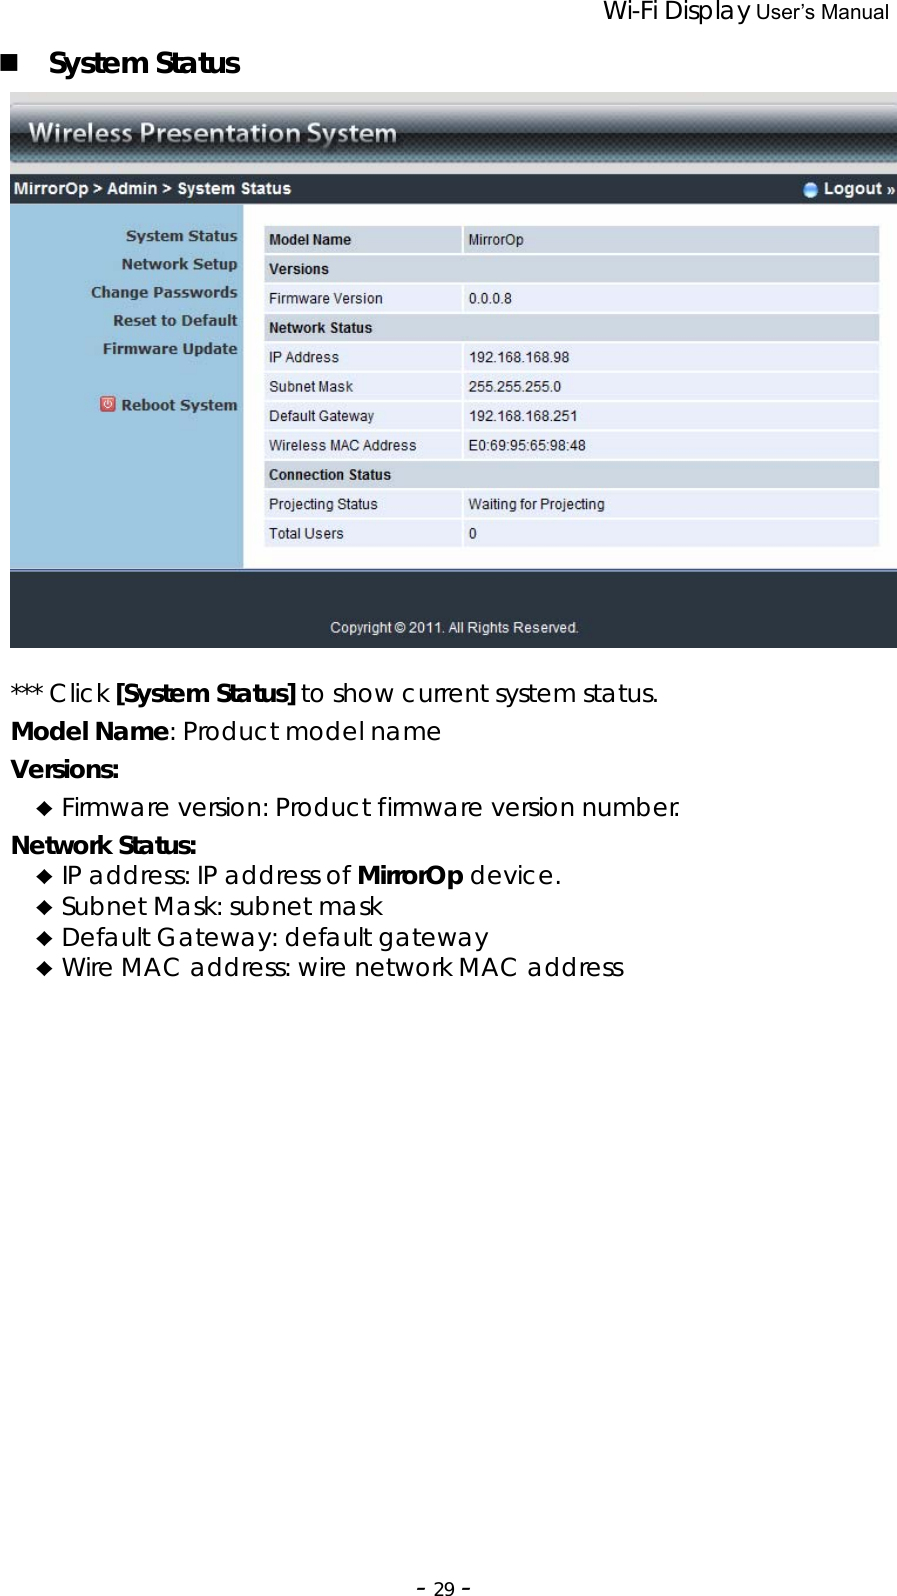                 Wi-Fi Display User’s Manual  ‐29‐ System Status   *** Click [System Status] to show current system status. Model Name: Product model name Versions: ♦ Firmware version: Product firmware version number. Network Status: ♦ IP address: IP address of MirrorOp device. ♦ Subnet Mask: subnet mask ♦ Default Gateway: default gateway ♦ Wire MAC address: wire network MAC address  